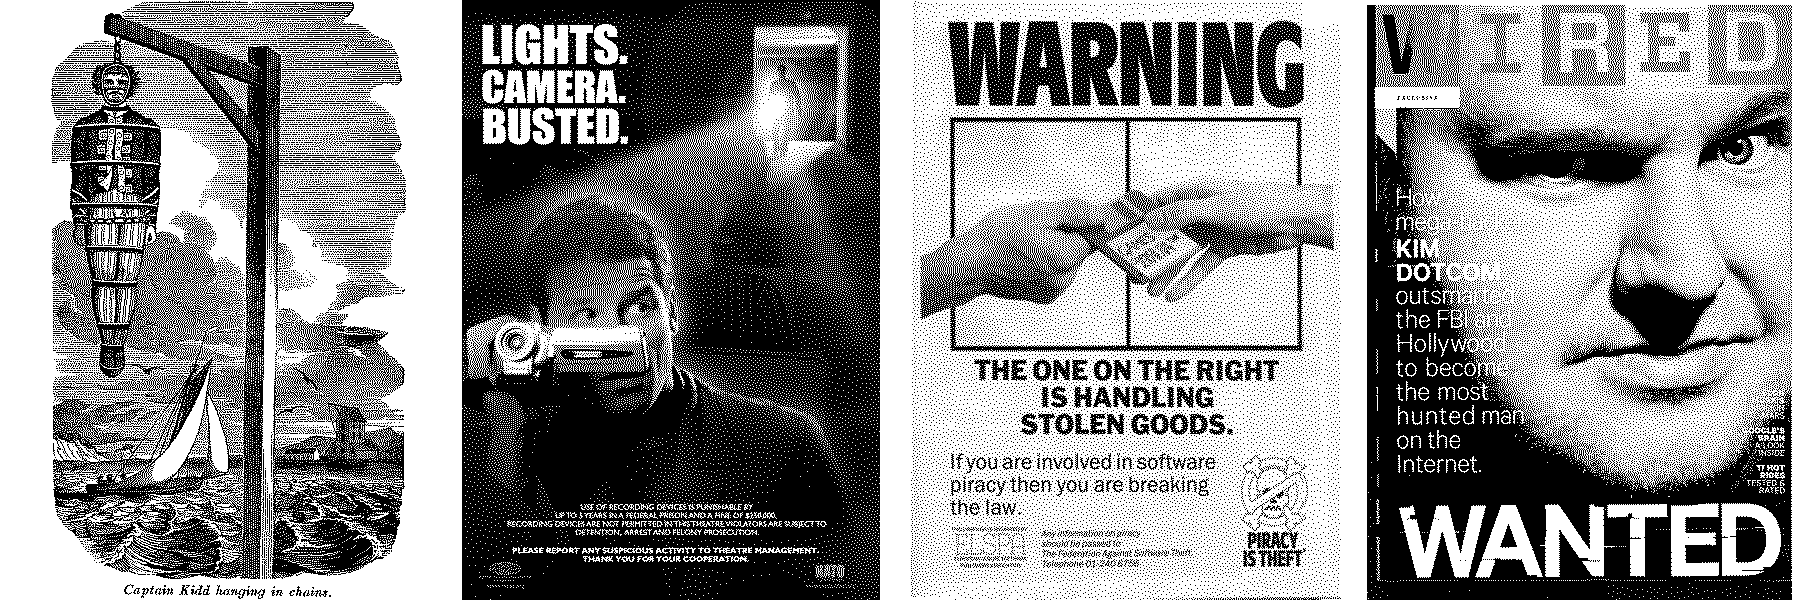 TPB_posters_02